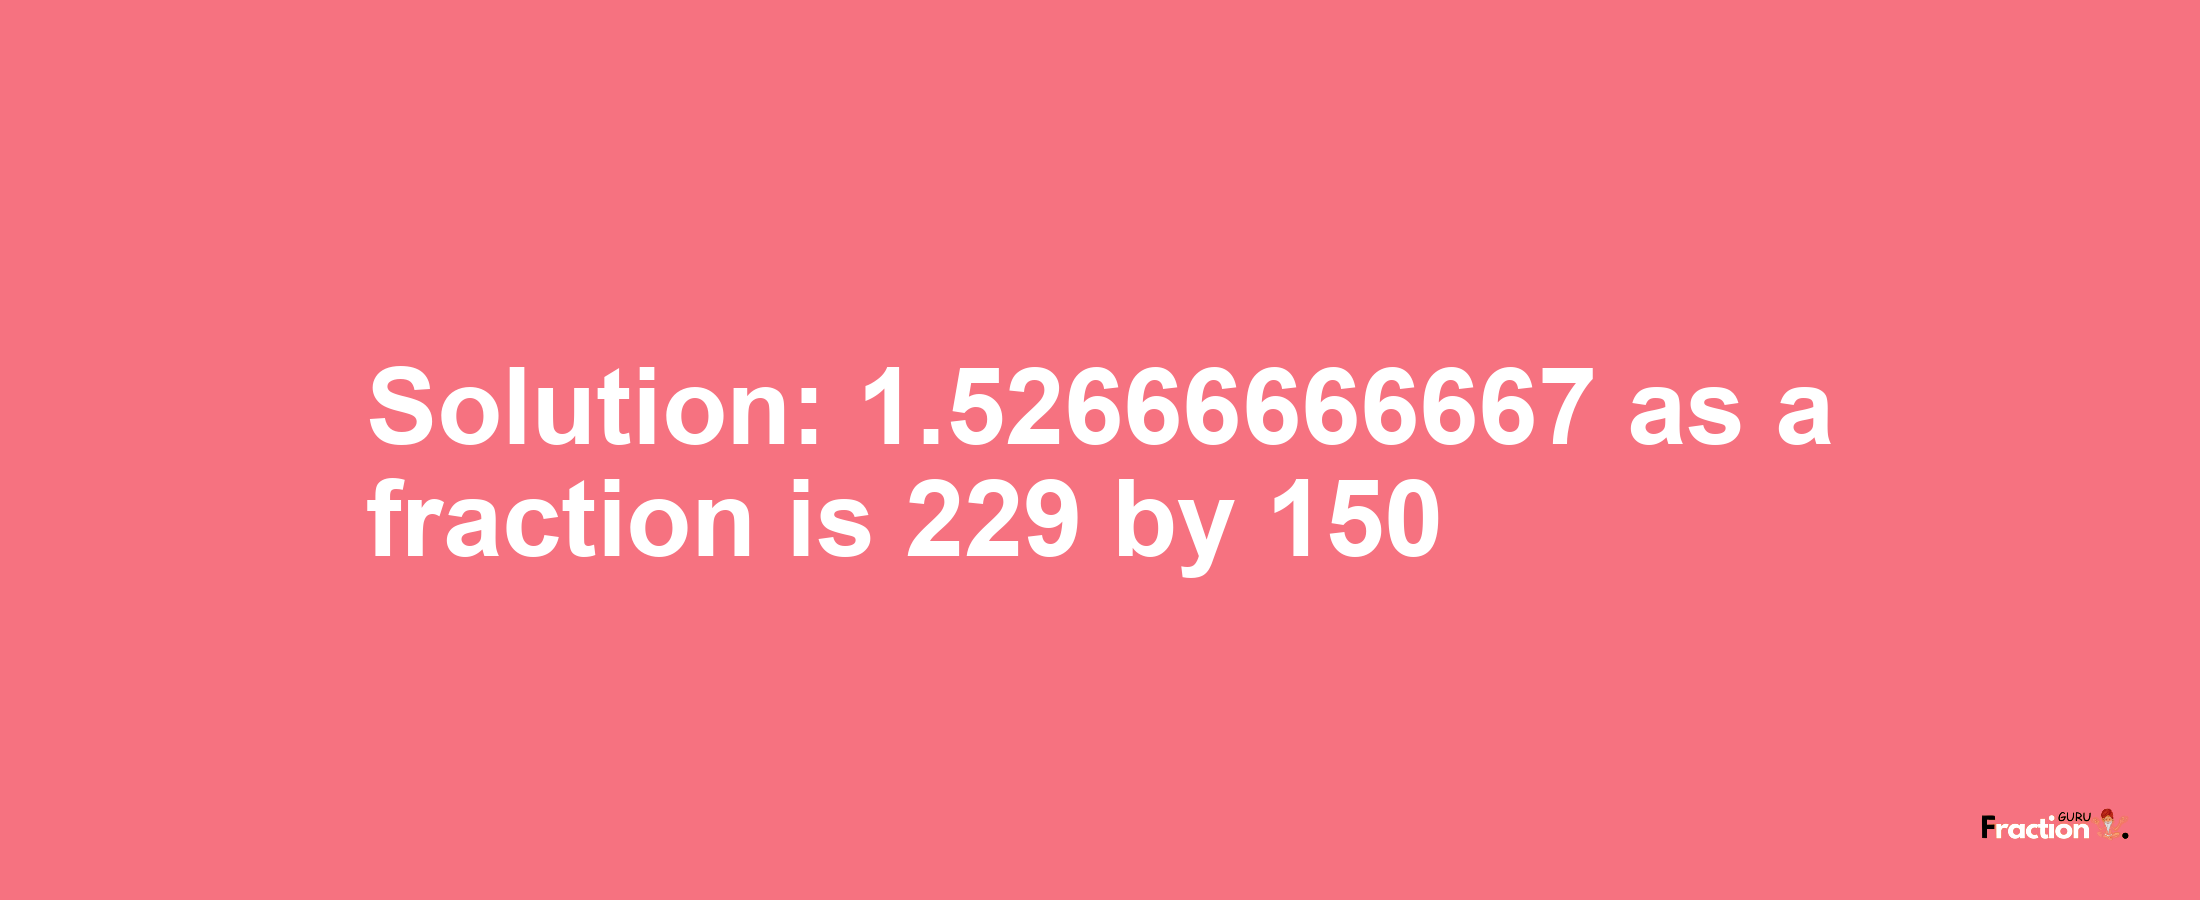 Solution:1.52666666667 as a fraction is 229/150